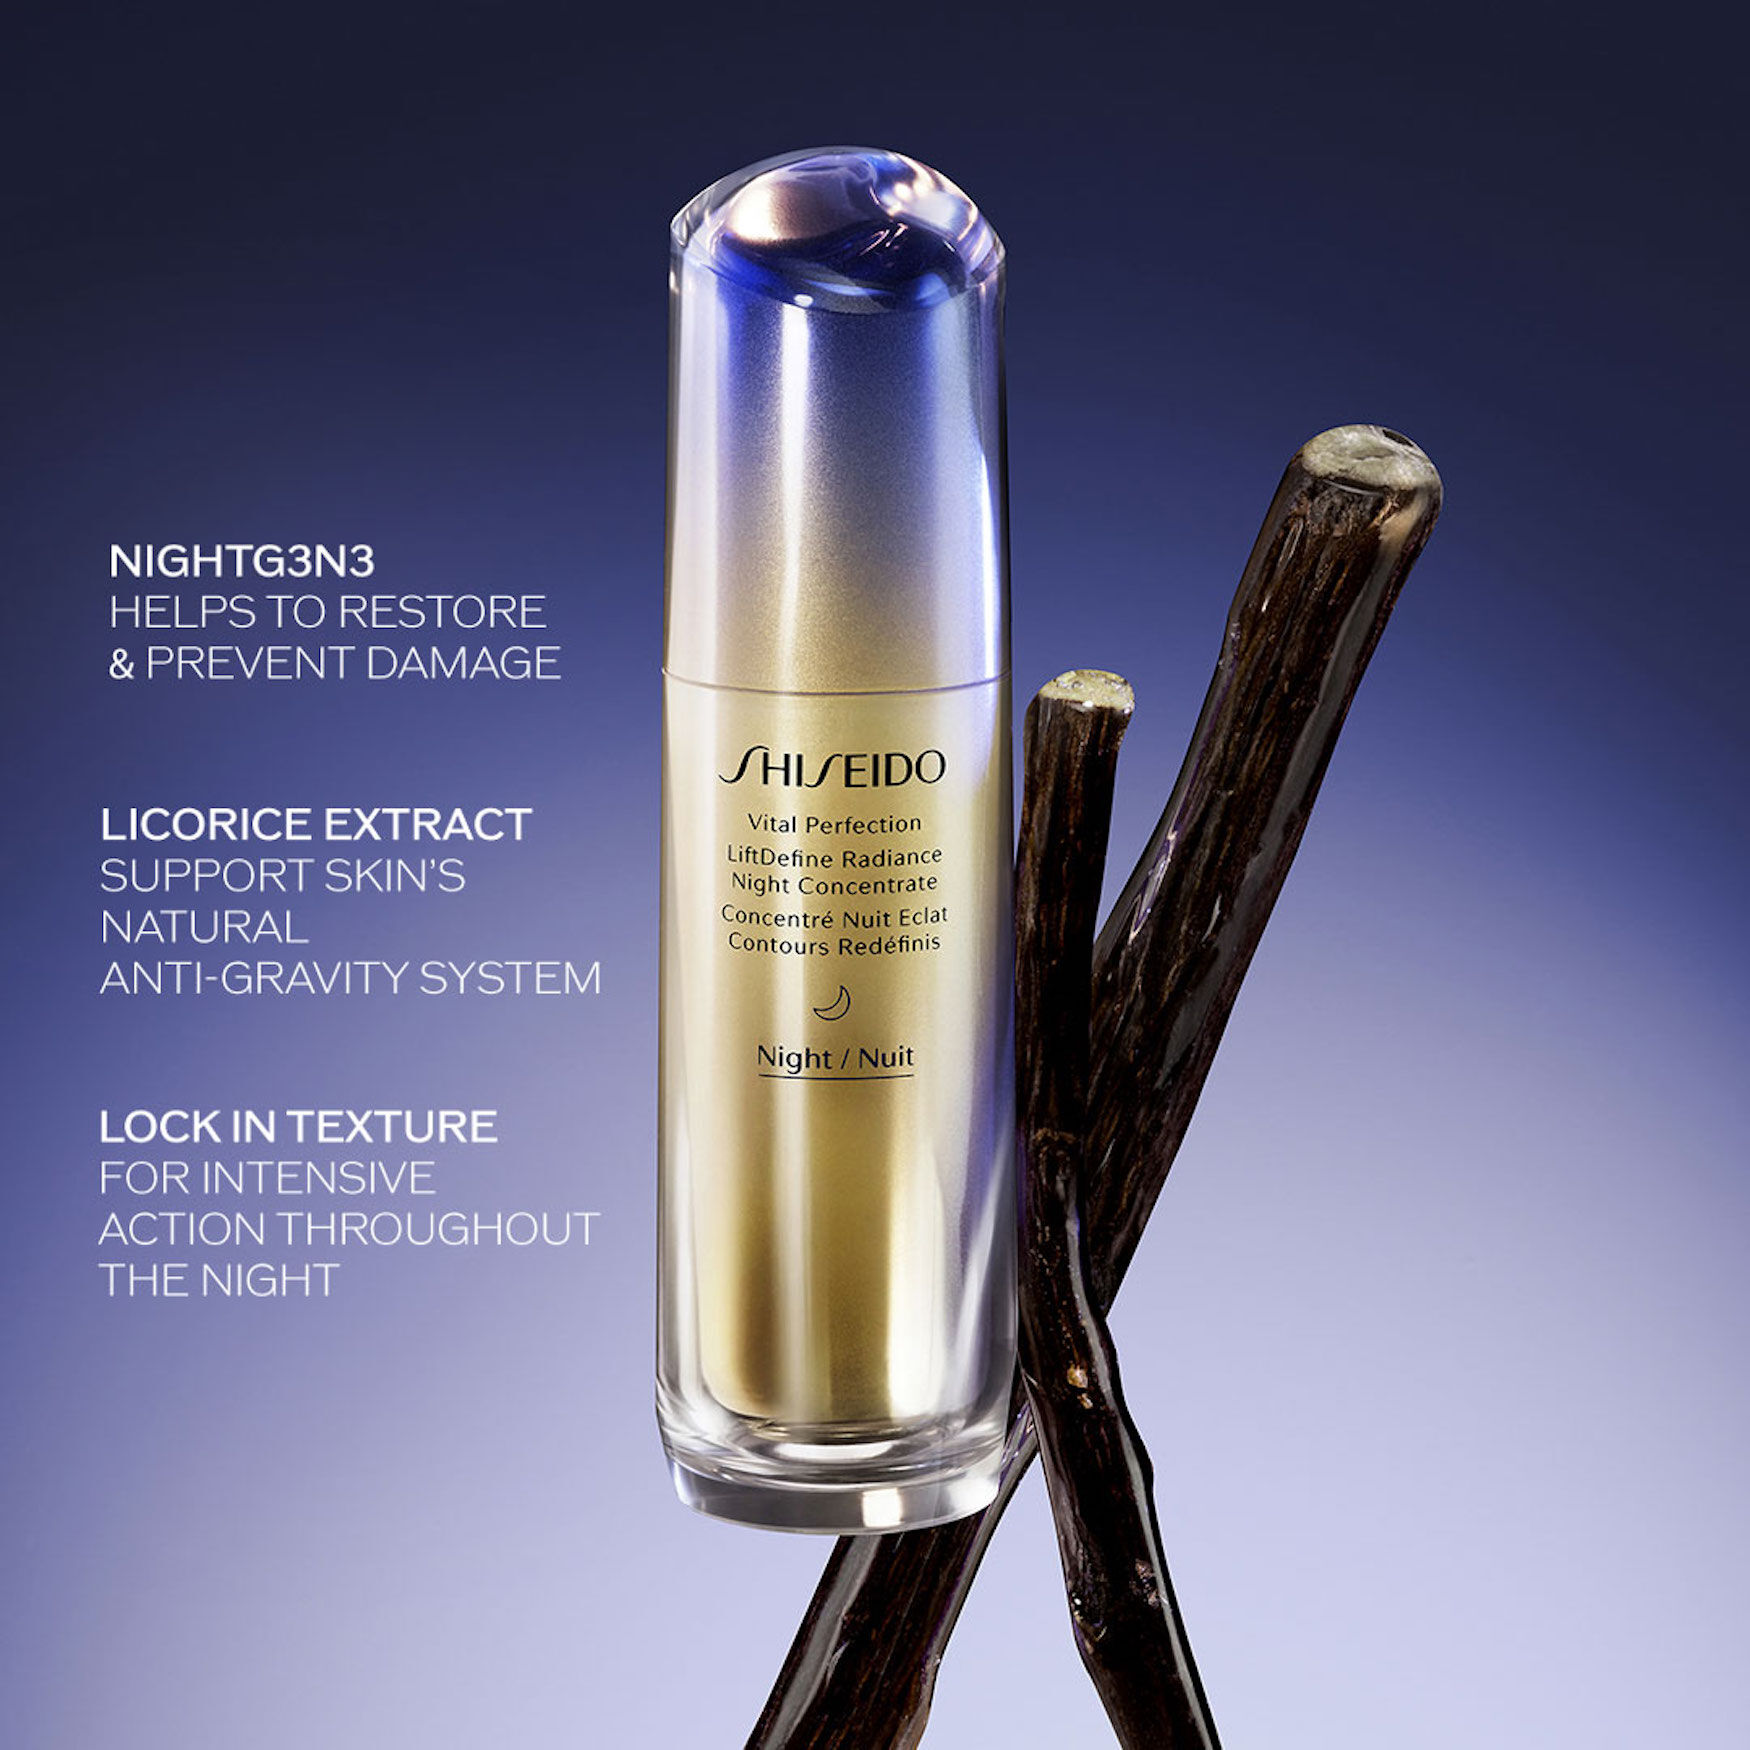 Shiseido Vital Perfection Night Concentrate | Space NK